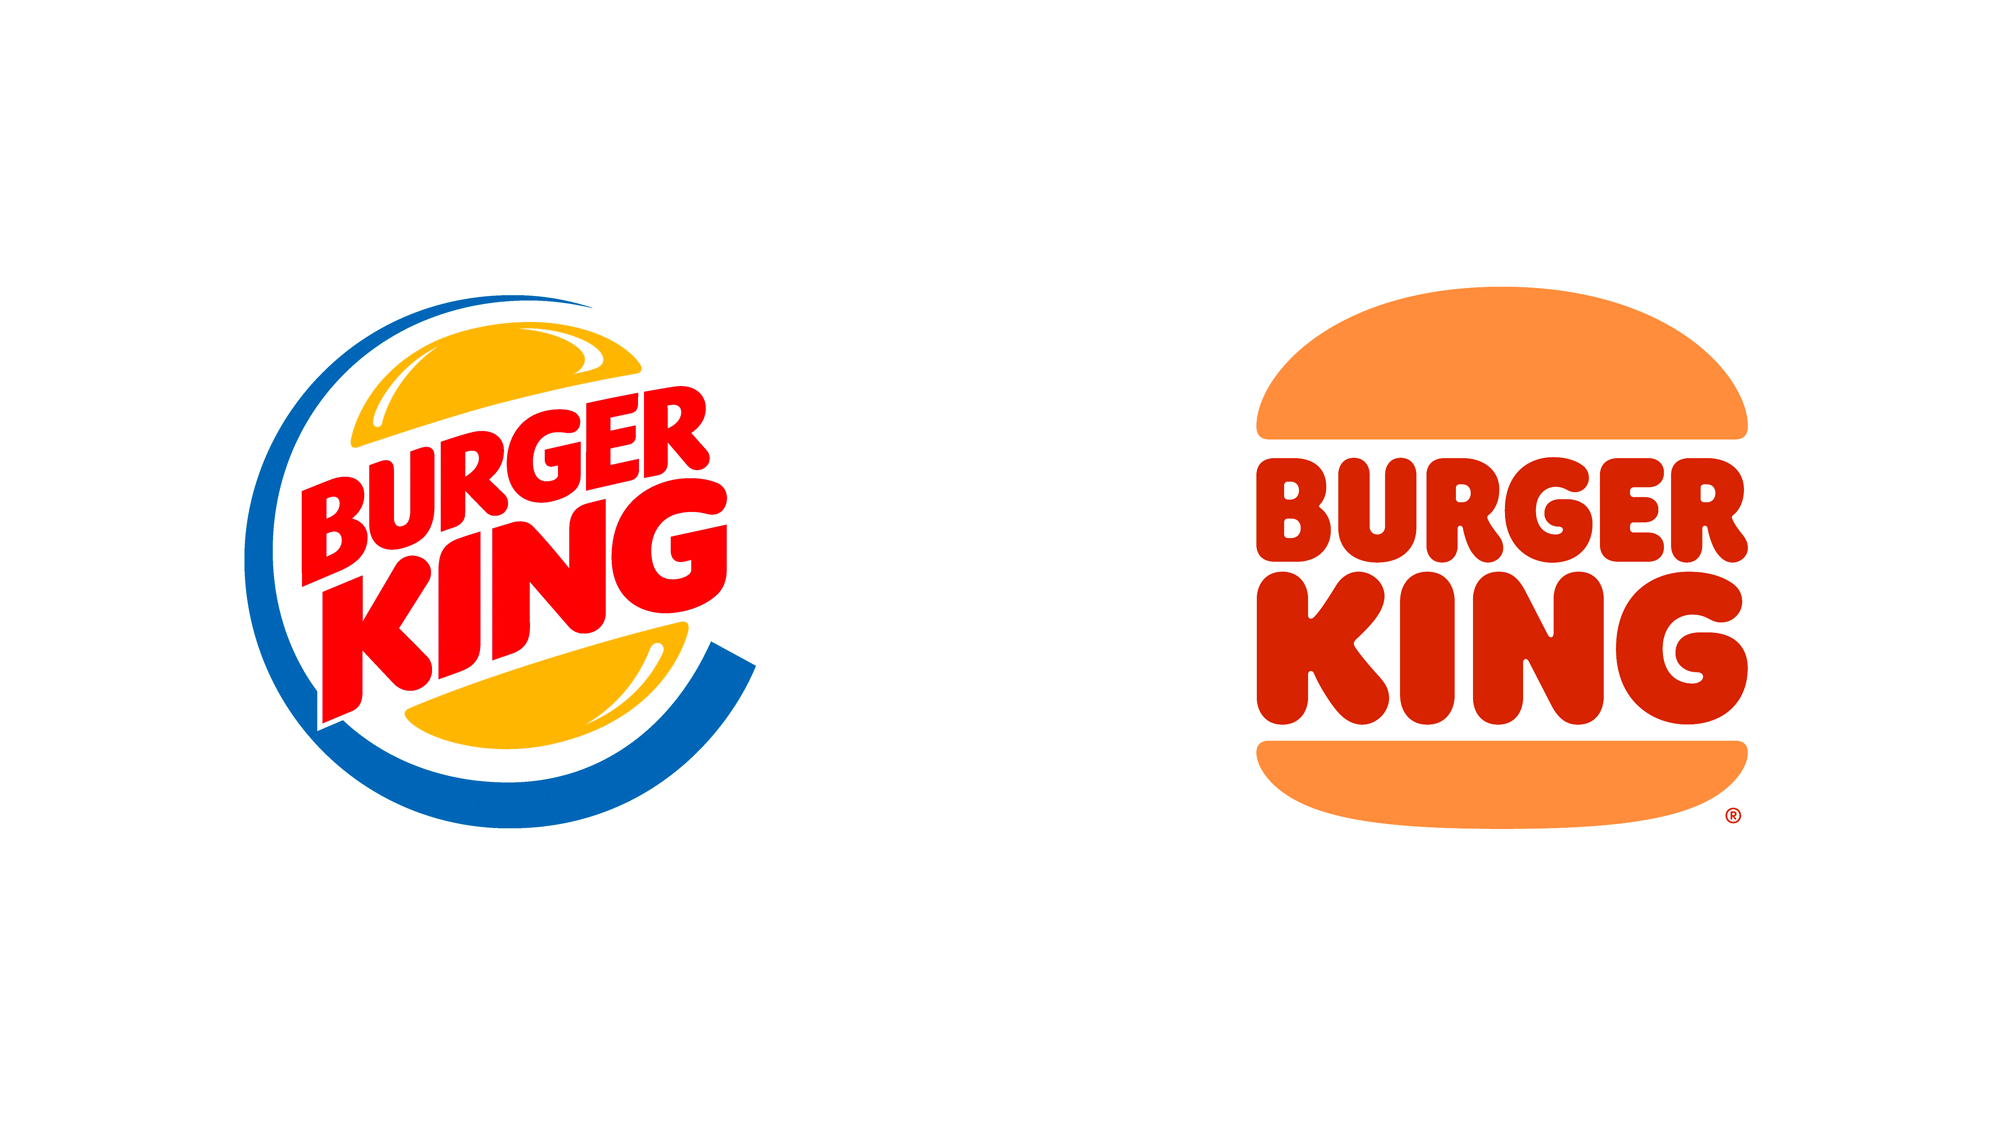 New Logo and Identity for Burger King by Jones Knowles Ritchie